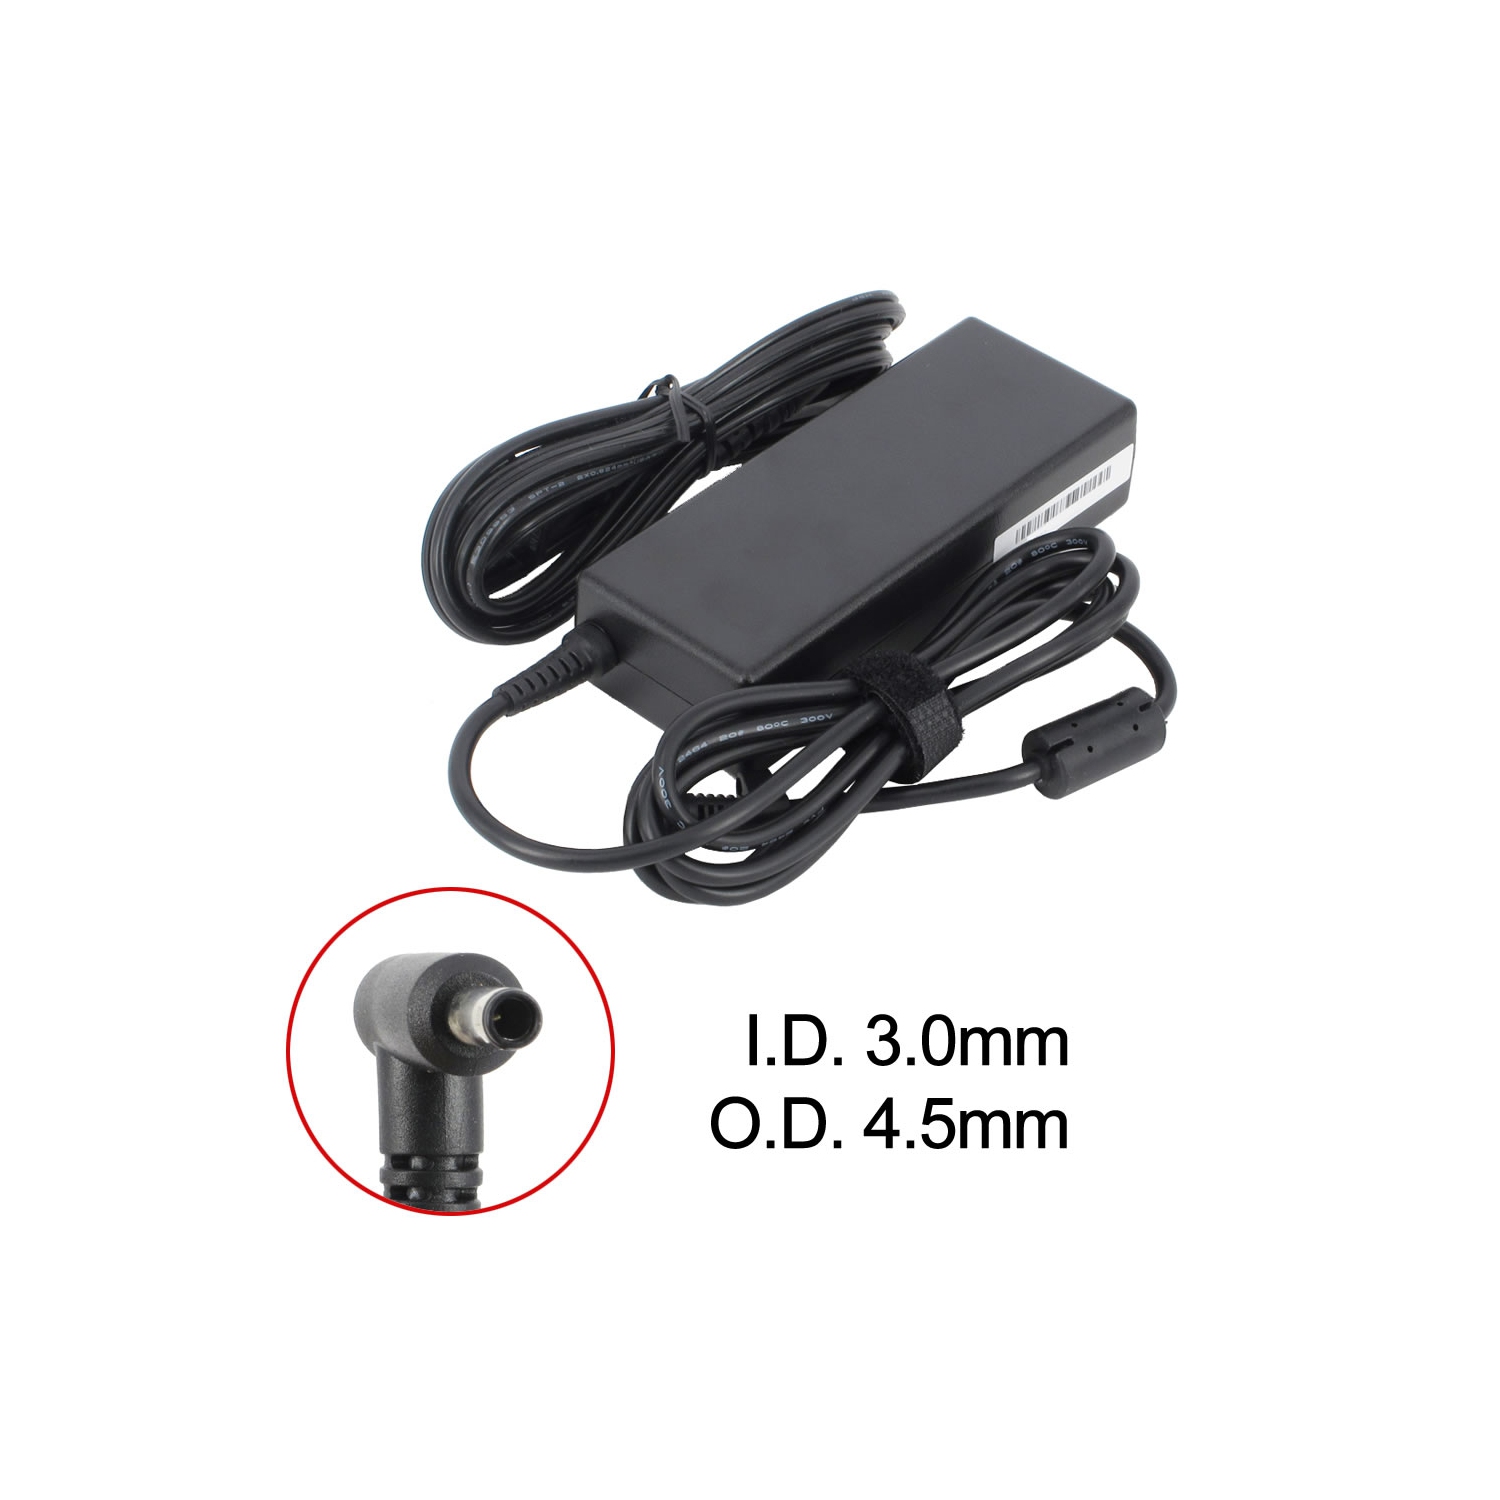 New Replacement Laptop AC Adapter for HP Spectre 13-4000, 719309-001, 741427-001, H6Y83AA, HSTNN-DA15, PA-1450-36HE